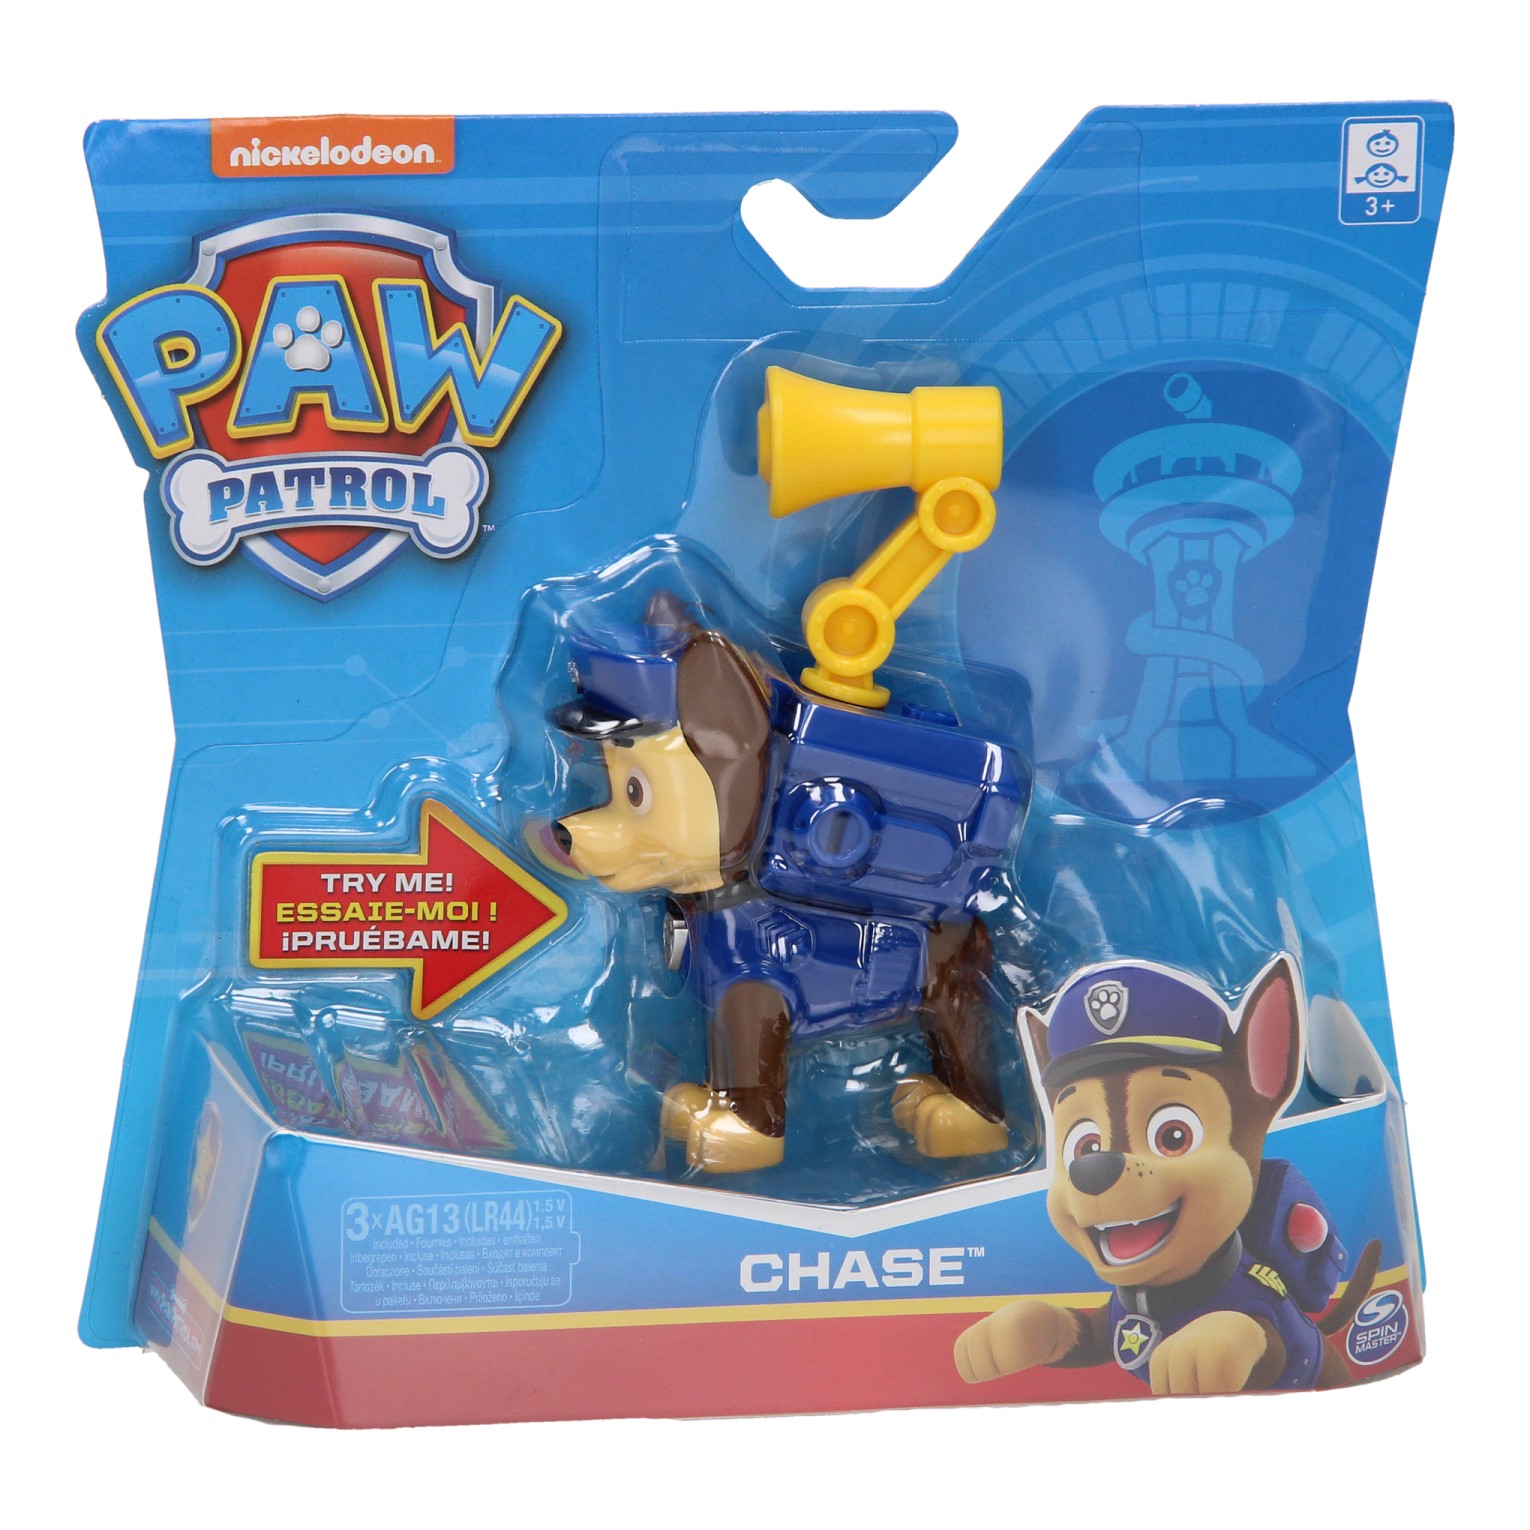 PAW Patrol Pup & Badge - Chase online Lobbes